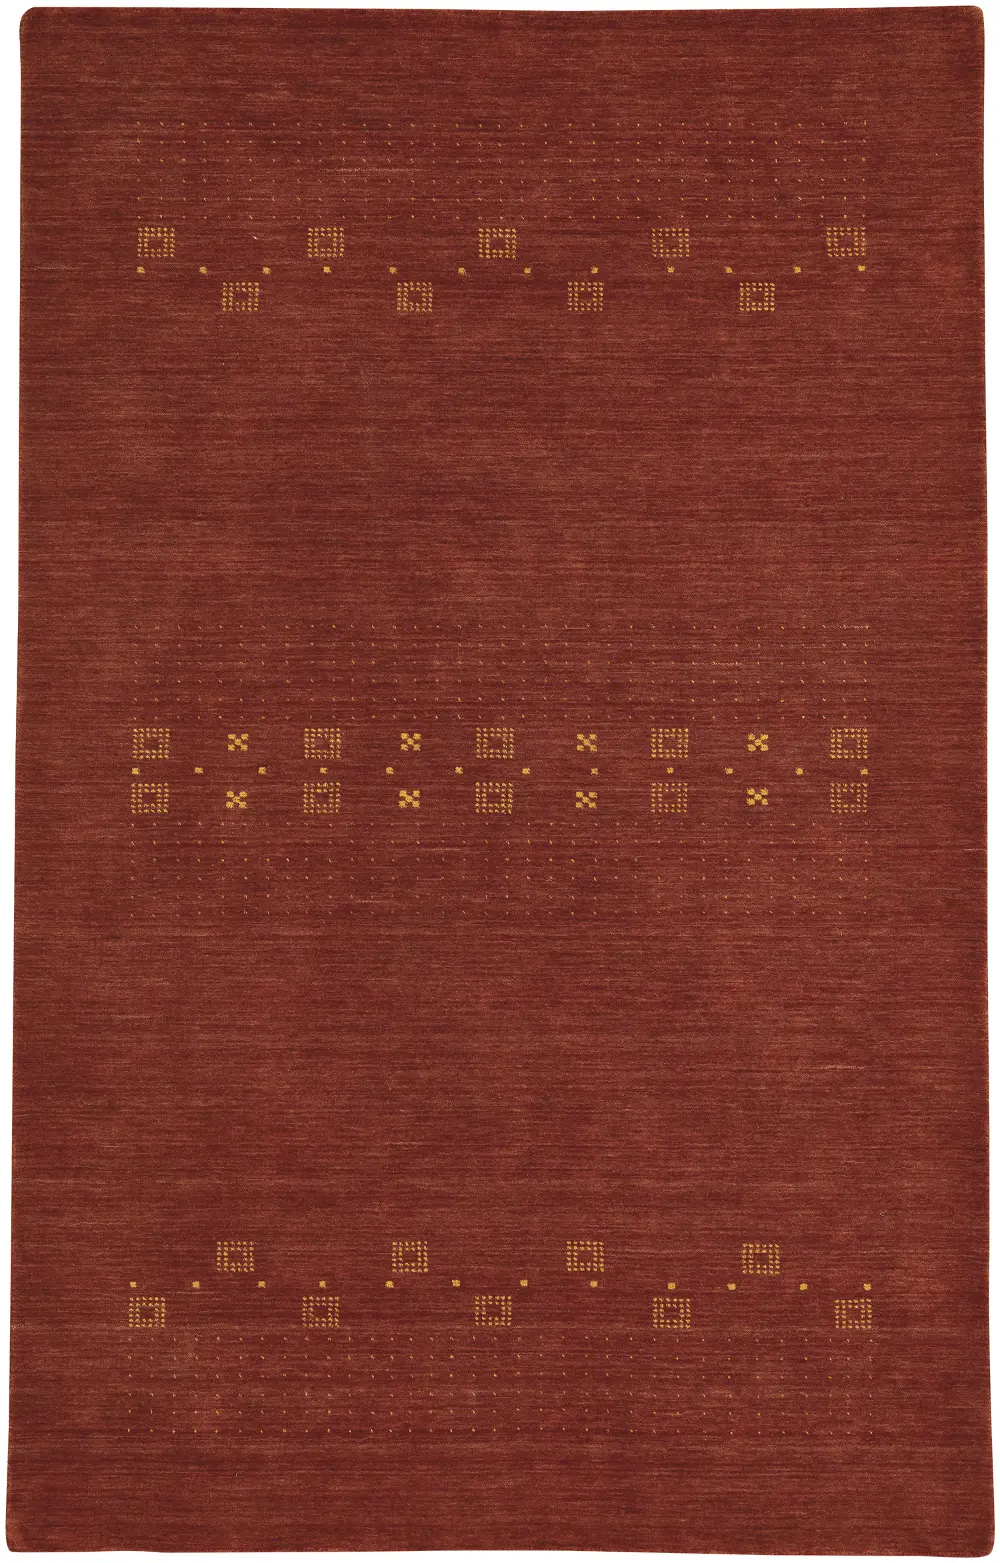 3495RS08001000800 8 x 10 Large Adobe Red Area Rug - Simply Gabbeh-1